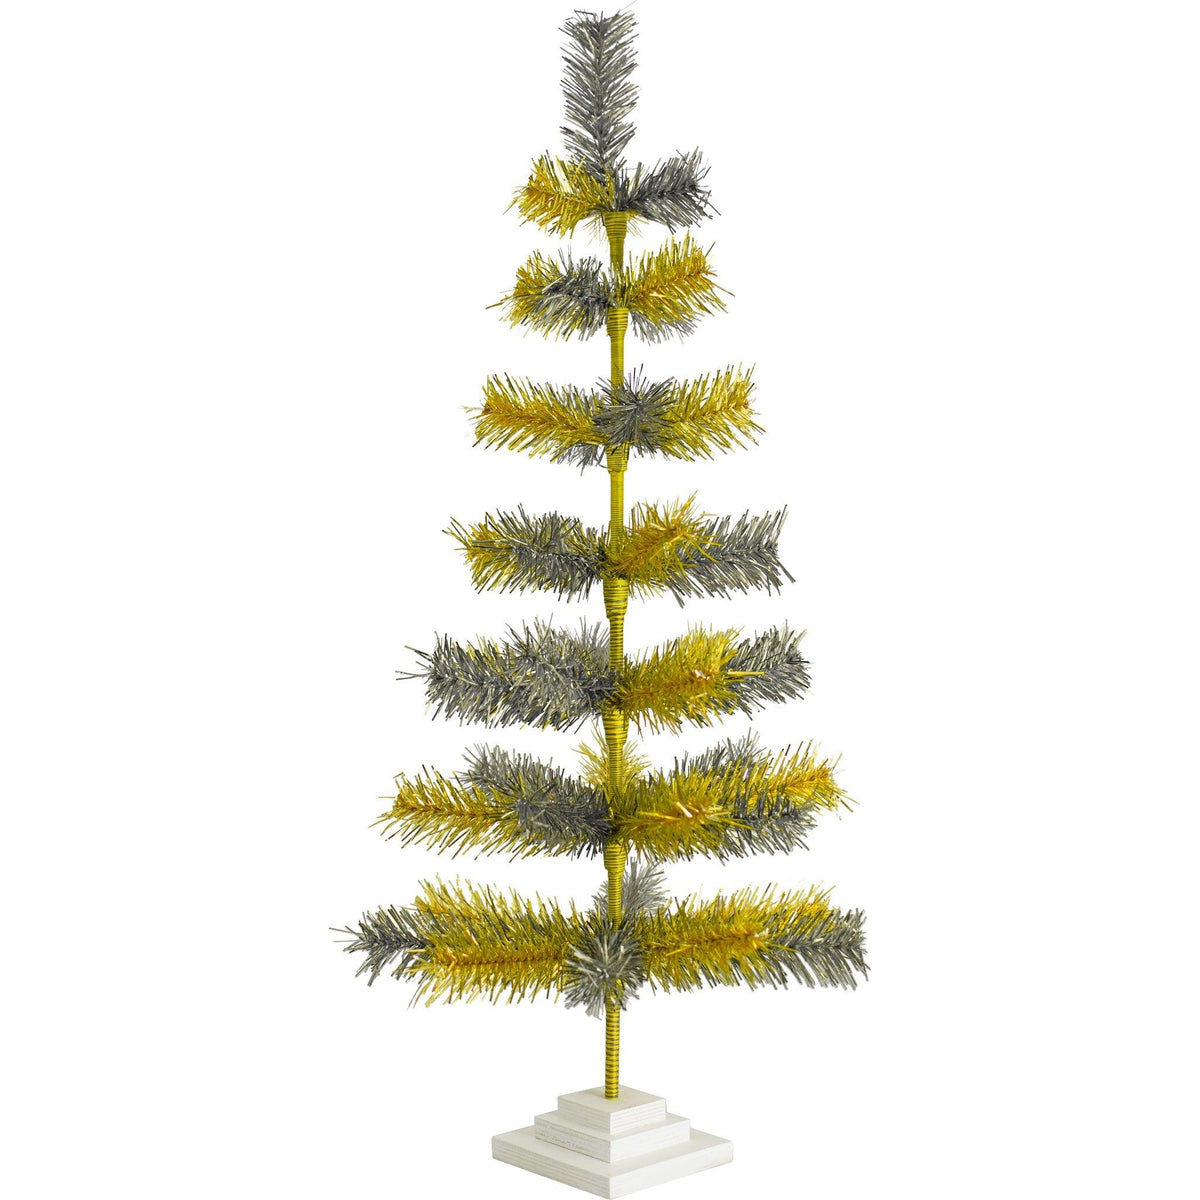 36 inch tall gold and silver multicolor tinsel christmas trees sold at leedisplay.com